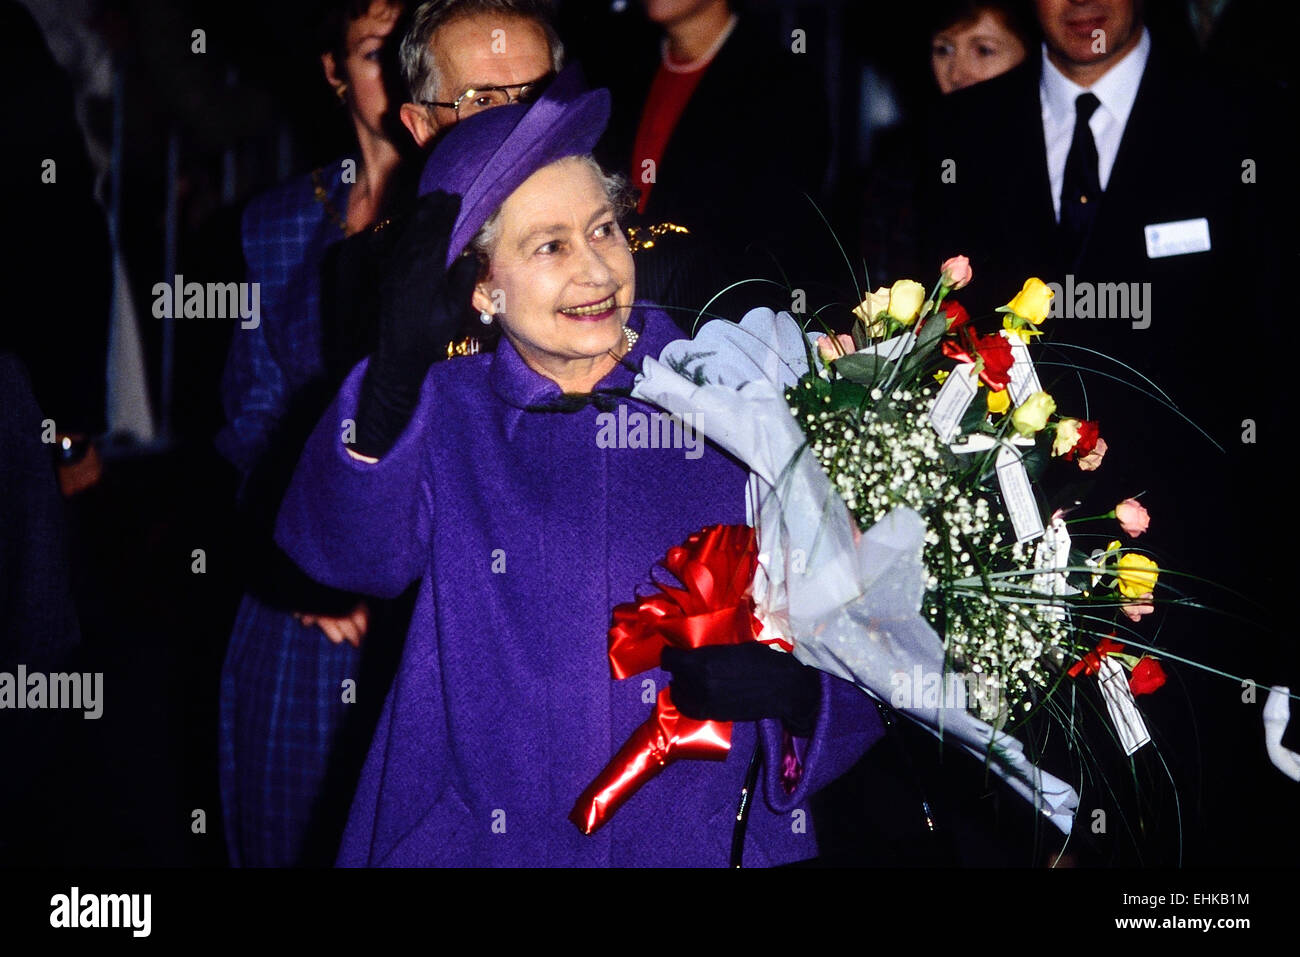 A smiling HRH Queen Elizabeth II wearing a purple / violet matching outfit. London, England, UK.  Circa 1980's Stock Photo